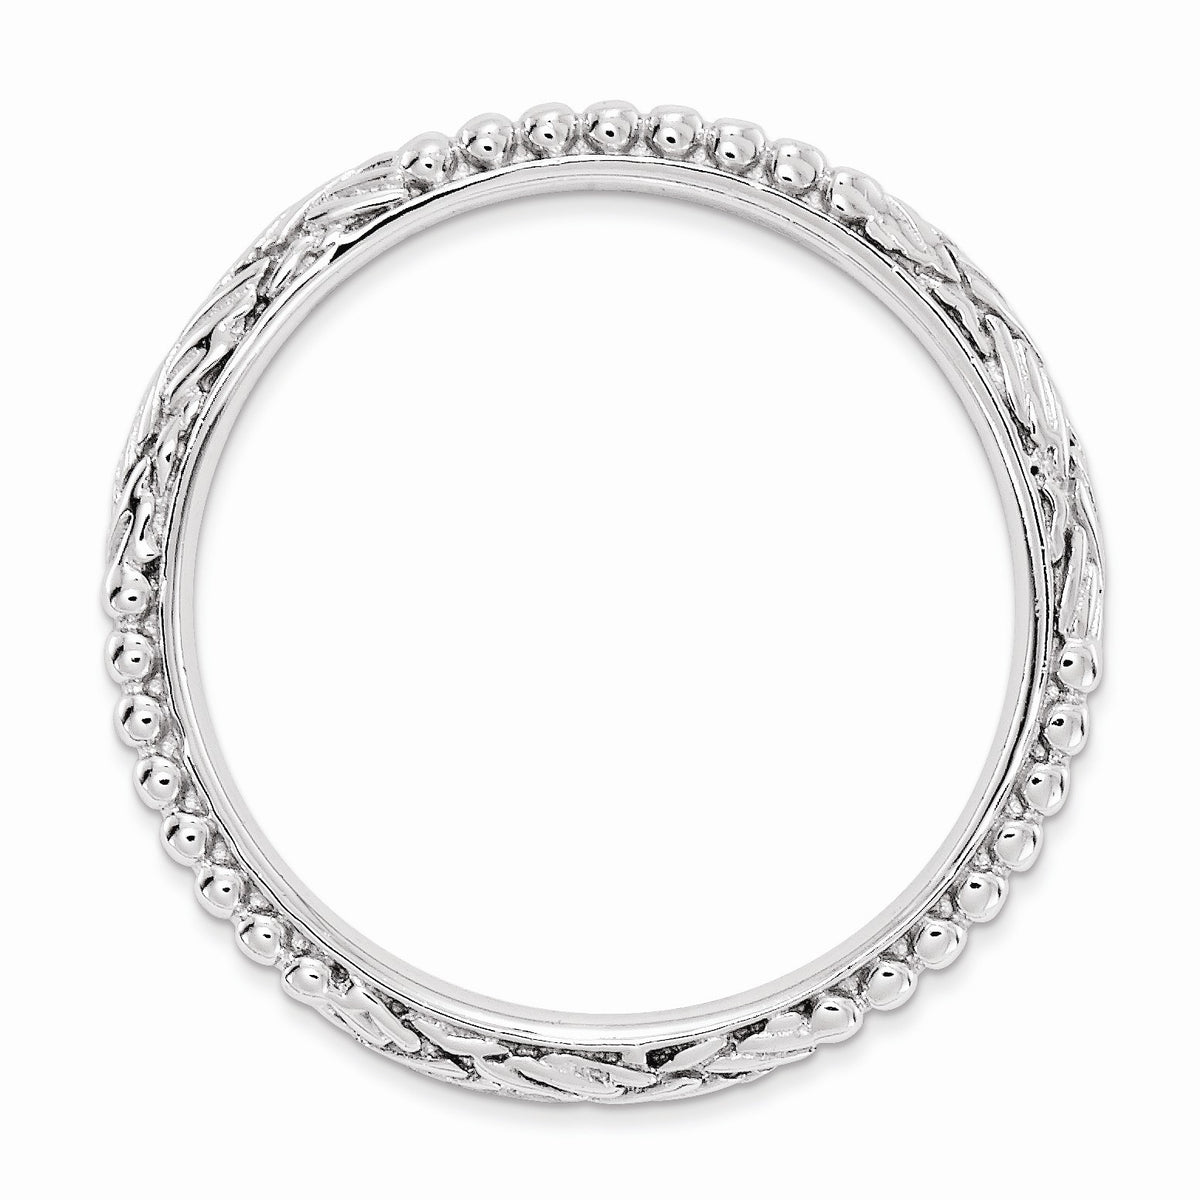 Alternate view of the 2.5mm Rhodium Plated Sterling Silver Stackable Patterned Band by The Black Bow Jewelry Co.